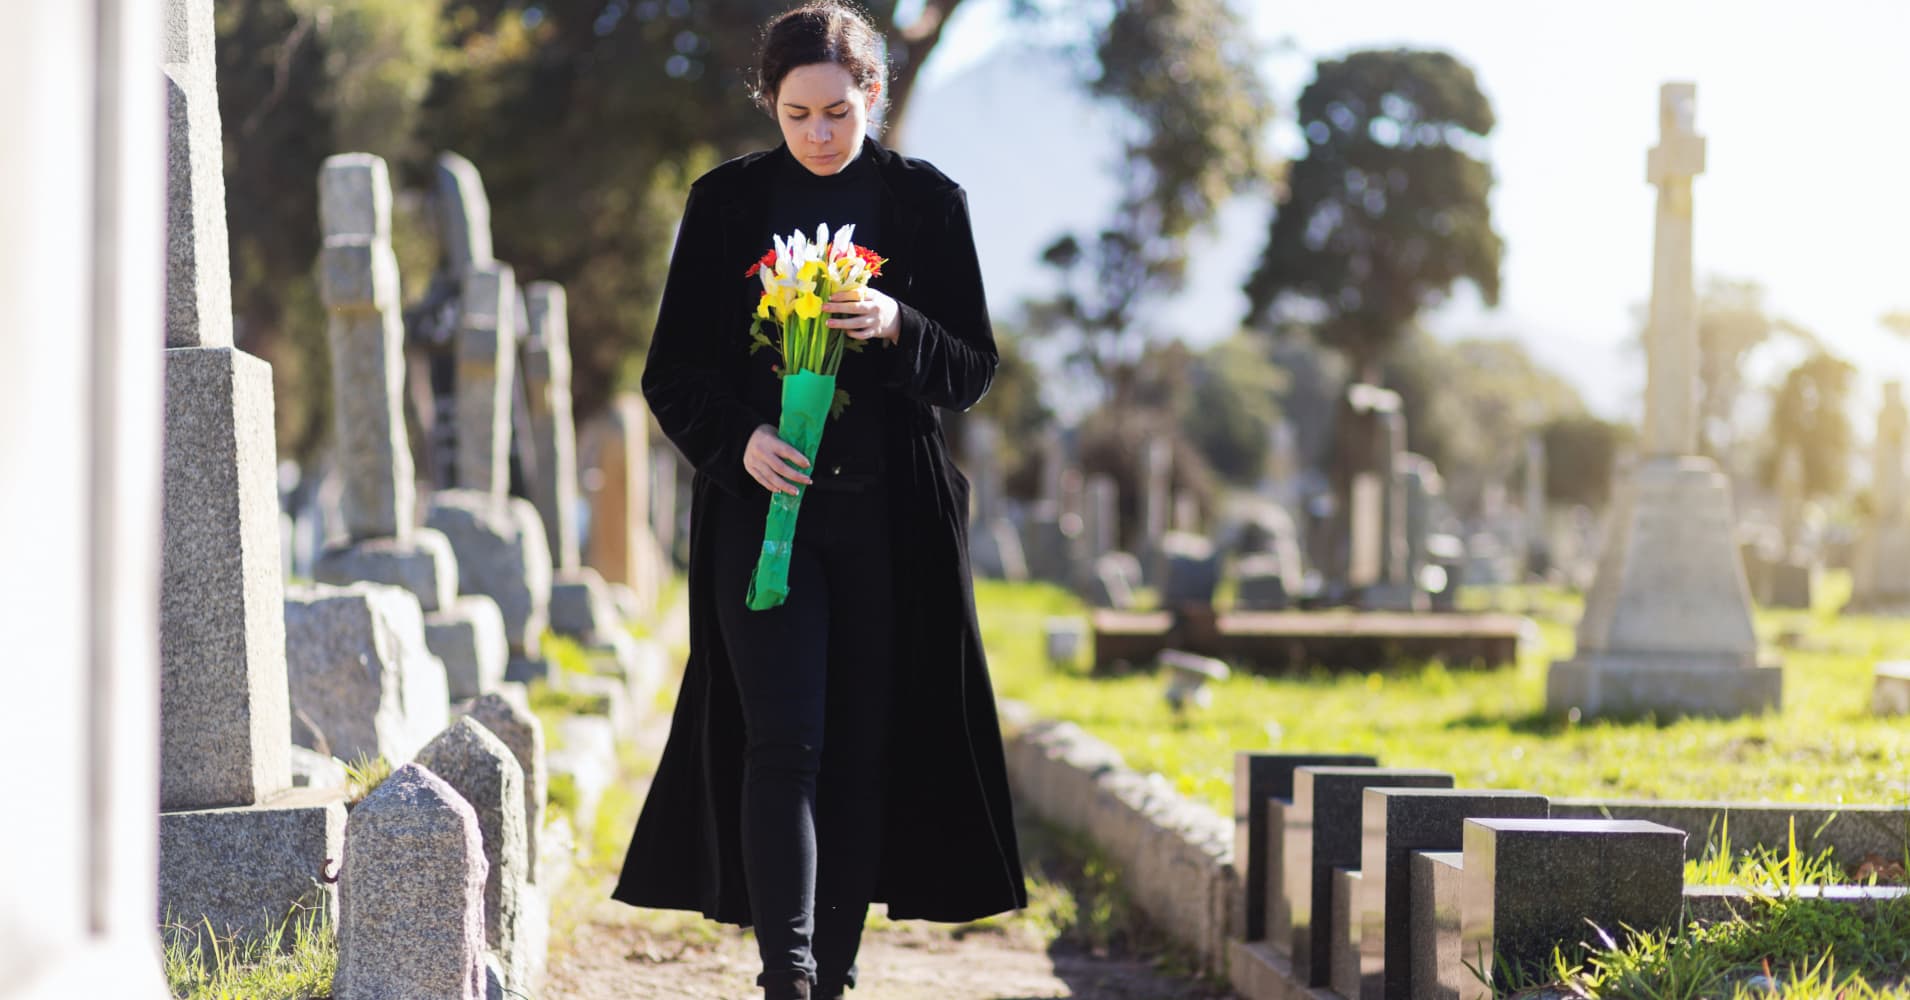 Bereaved young woman in black taking flowers to grave